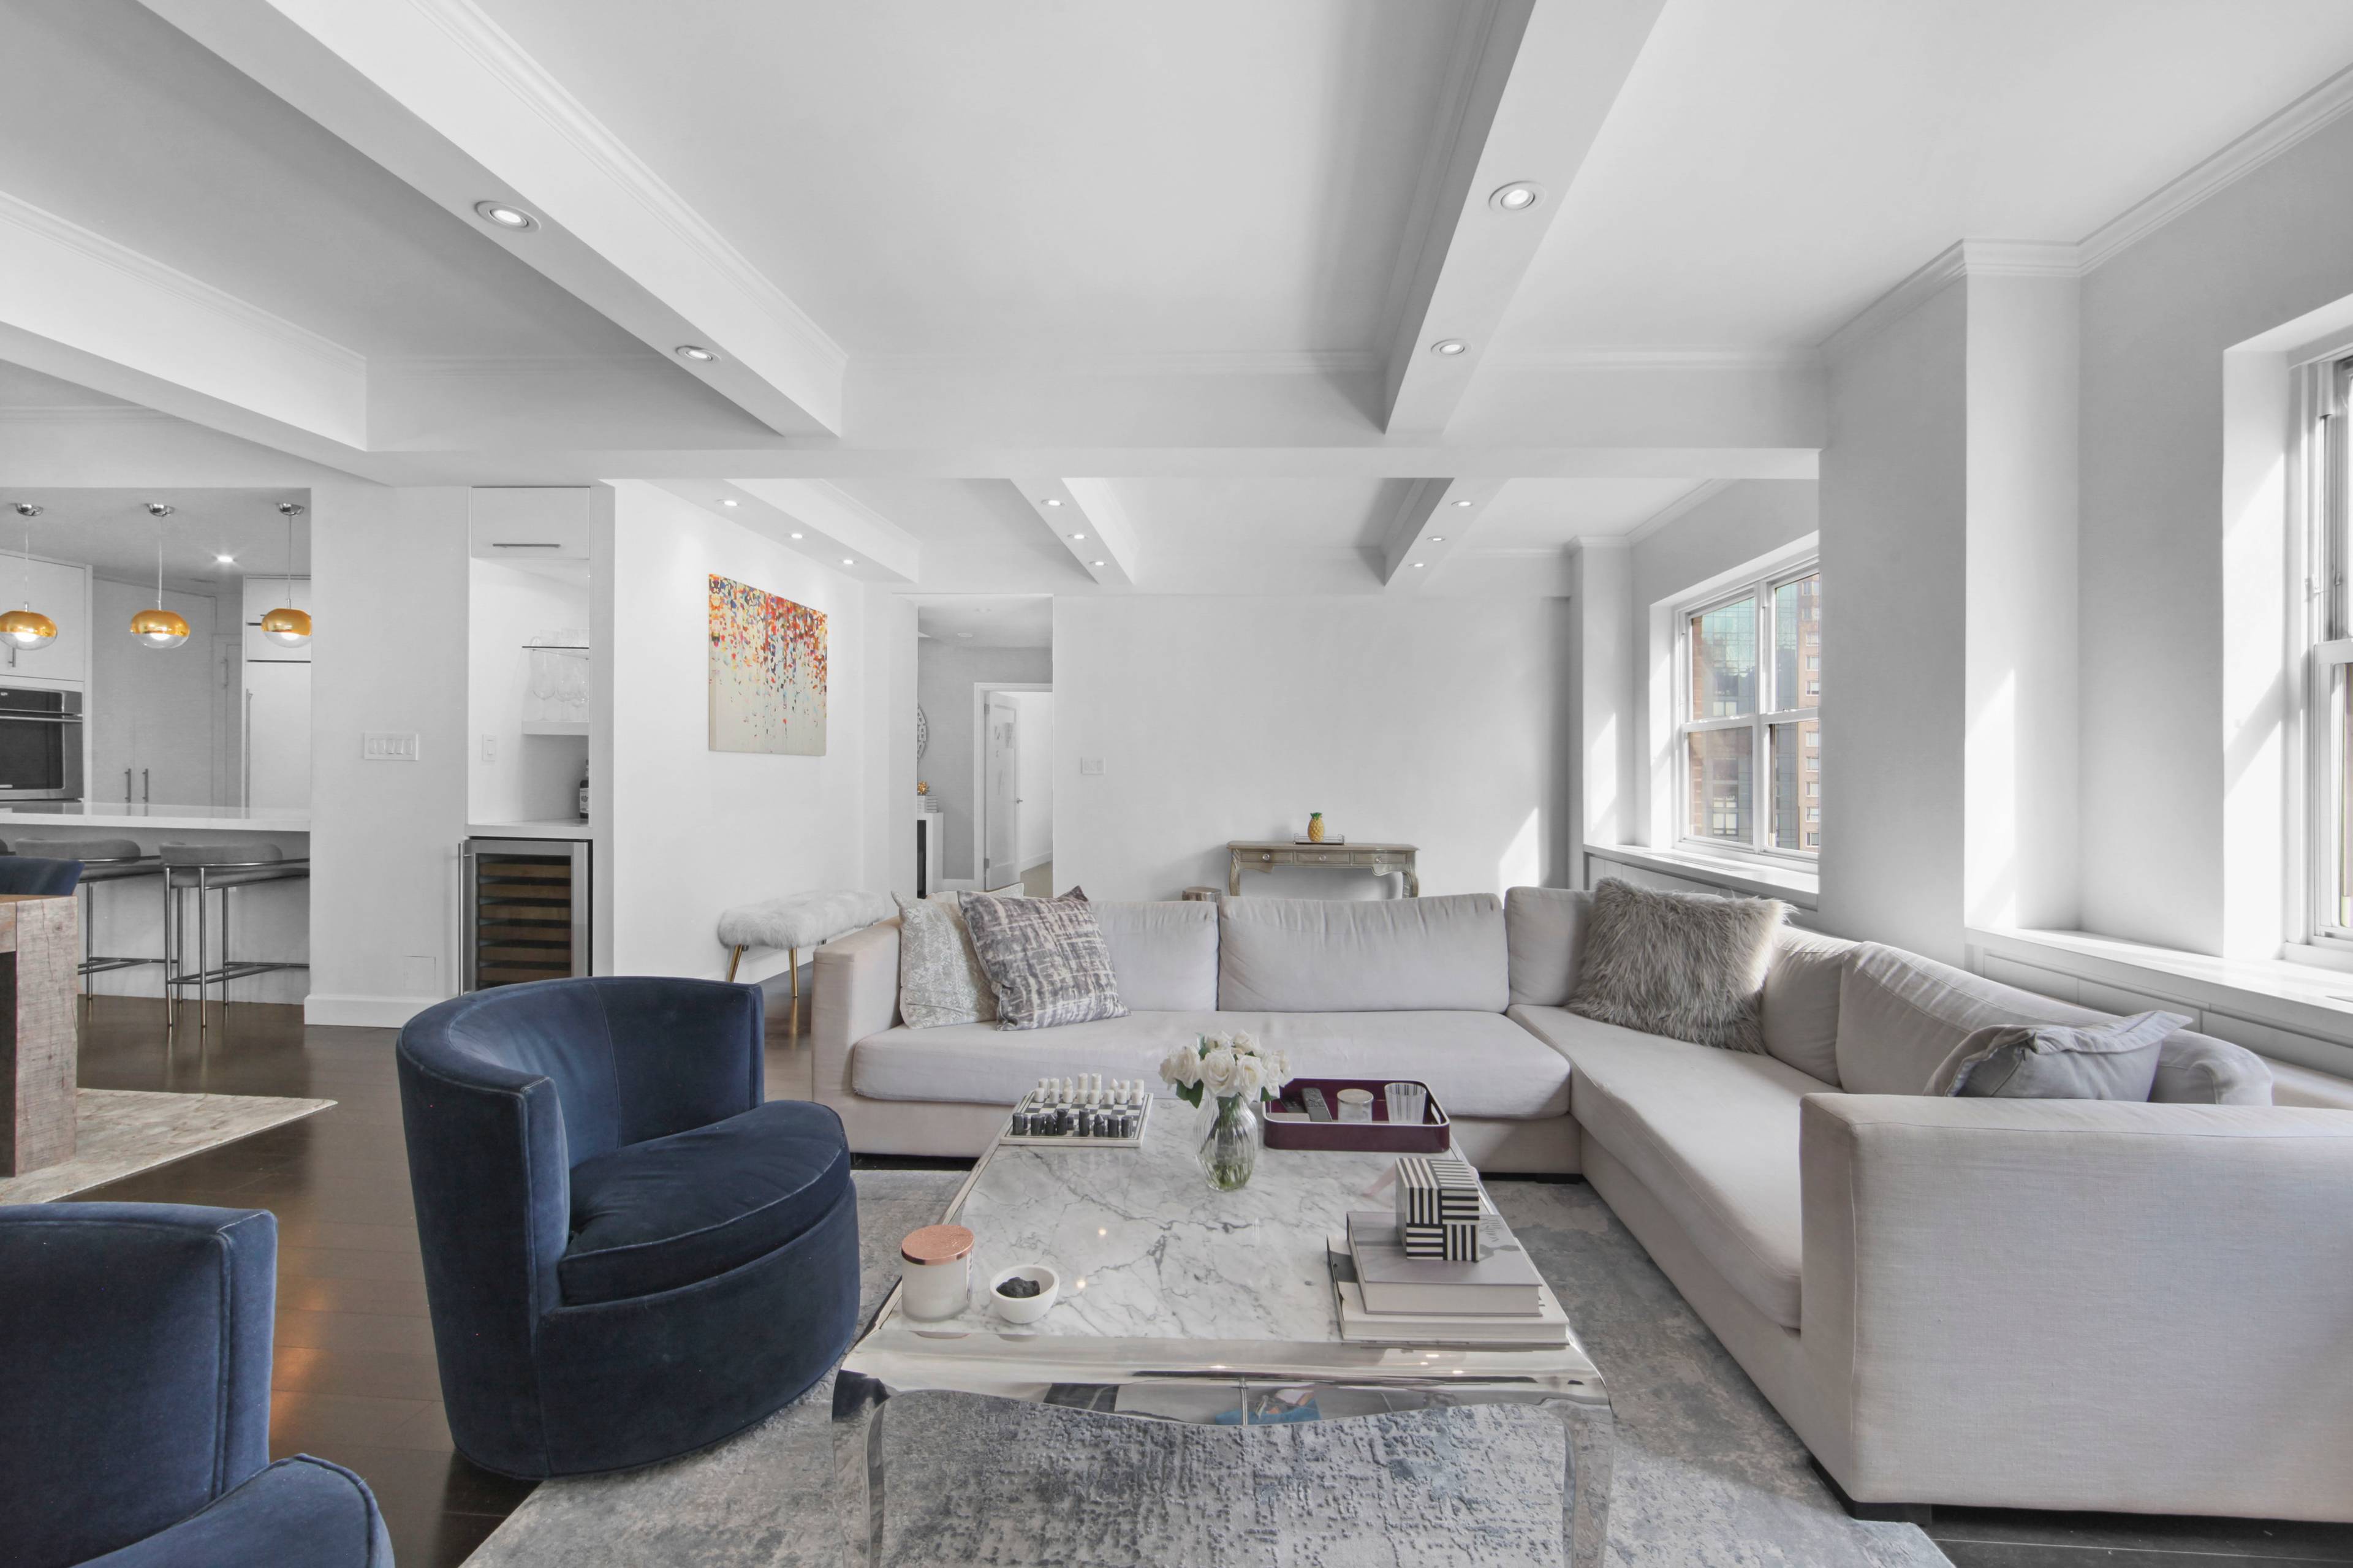 Gracious 4 Bedroom , Modern Meets  Pre War Charm on the Upper East Side